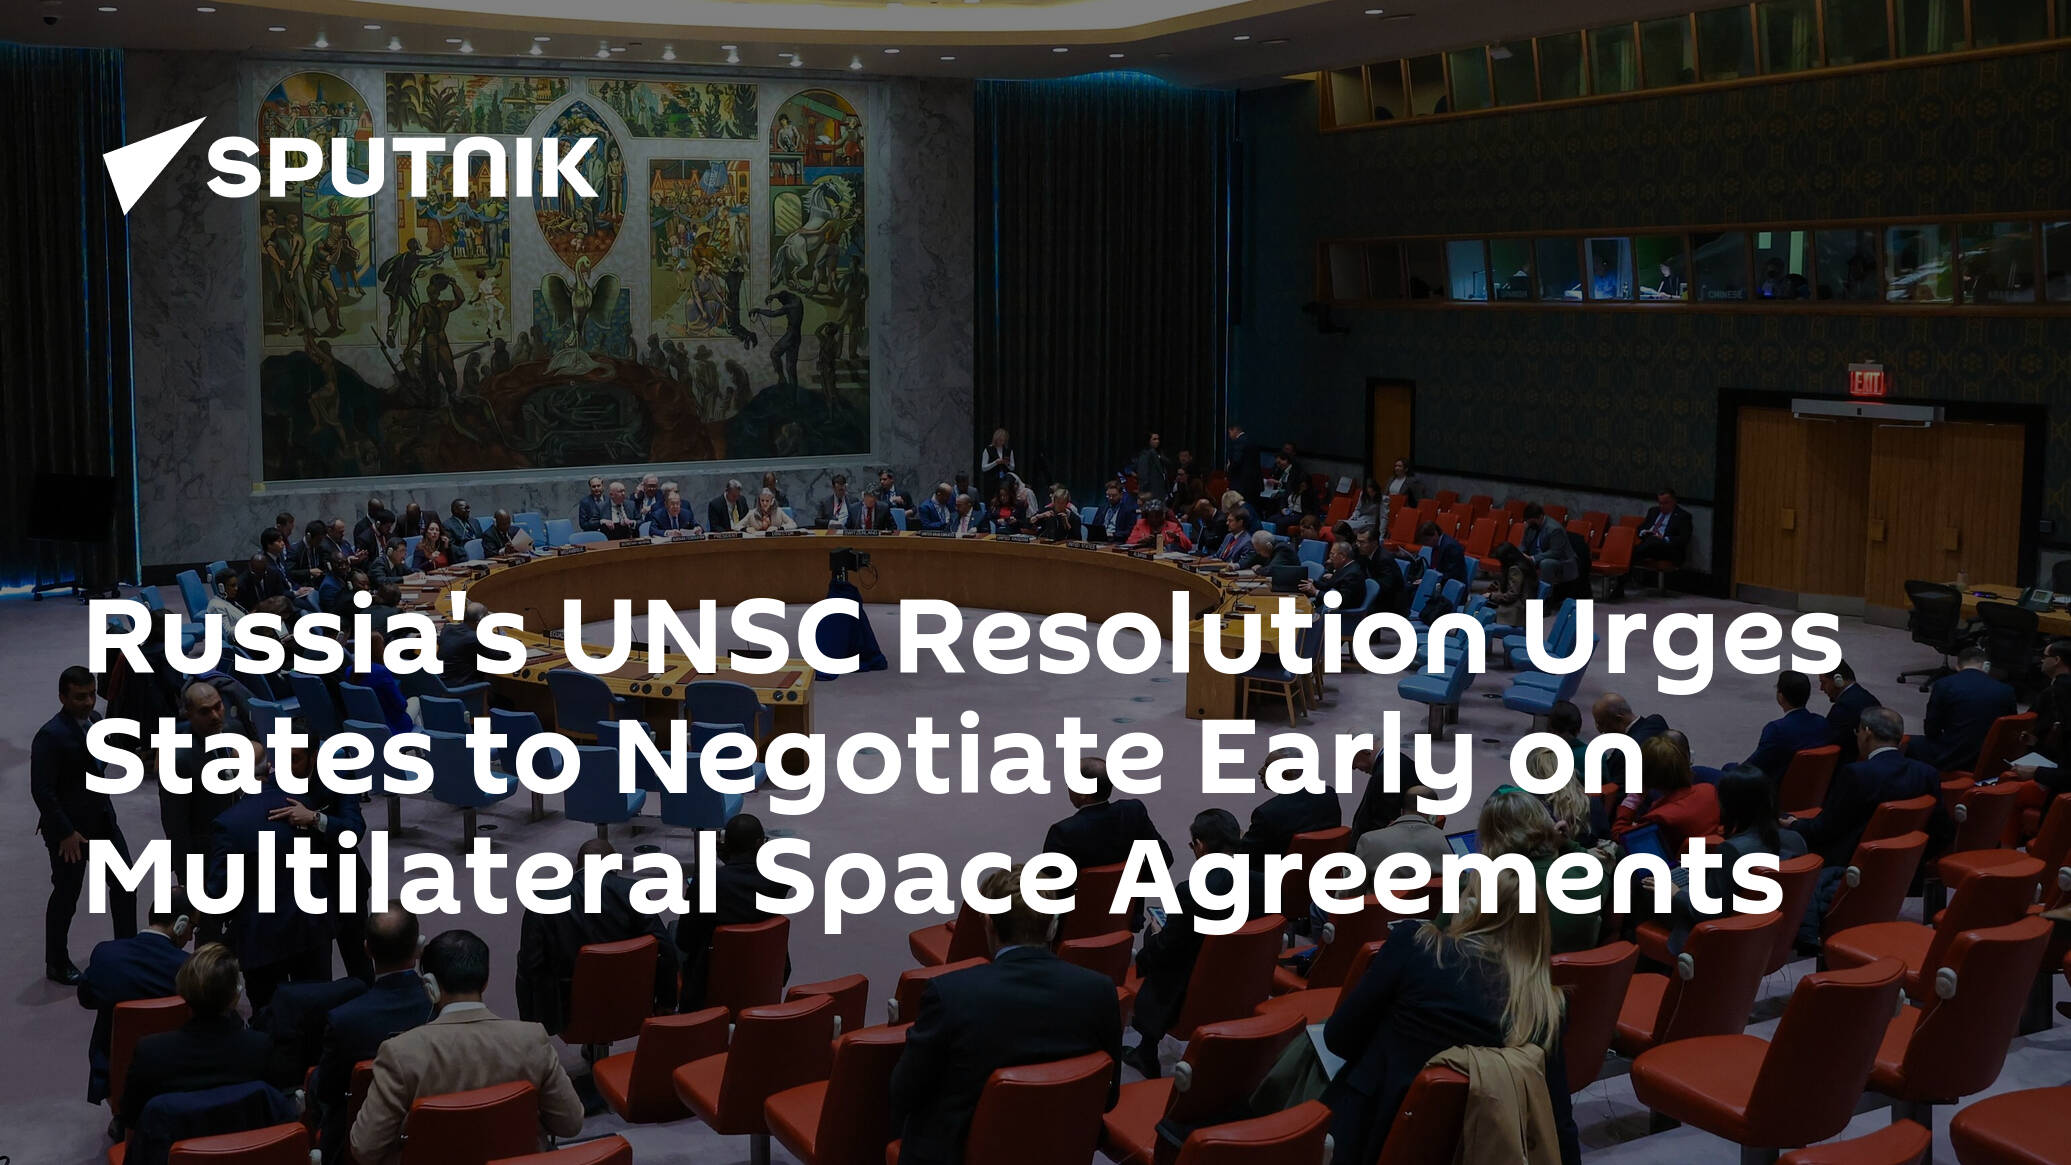 Russia's UNSC Resolution Urges States to Negotiate Early on Multilateral Space Agreements